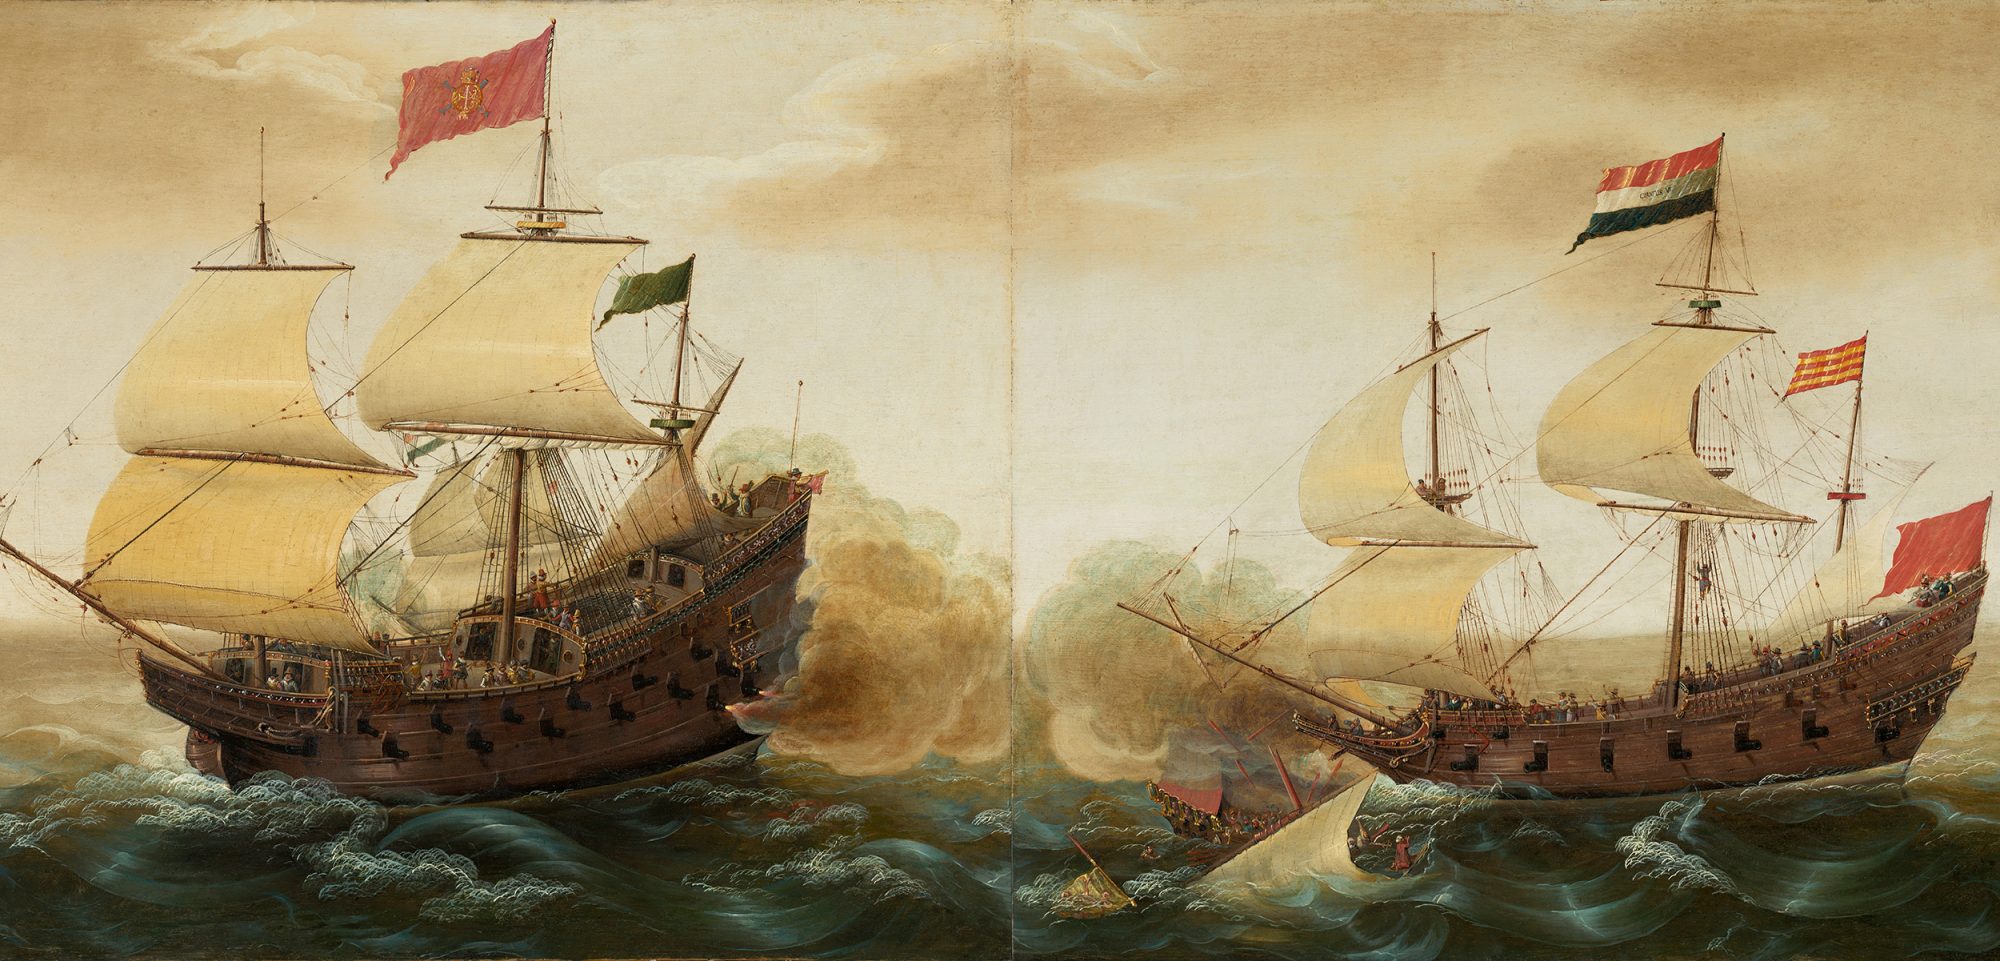 Manila Galleons were part of the history of Guadalupe Island, Painting by Cornelis Verbeeck, circa 1618